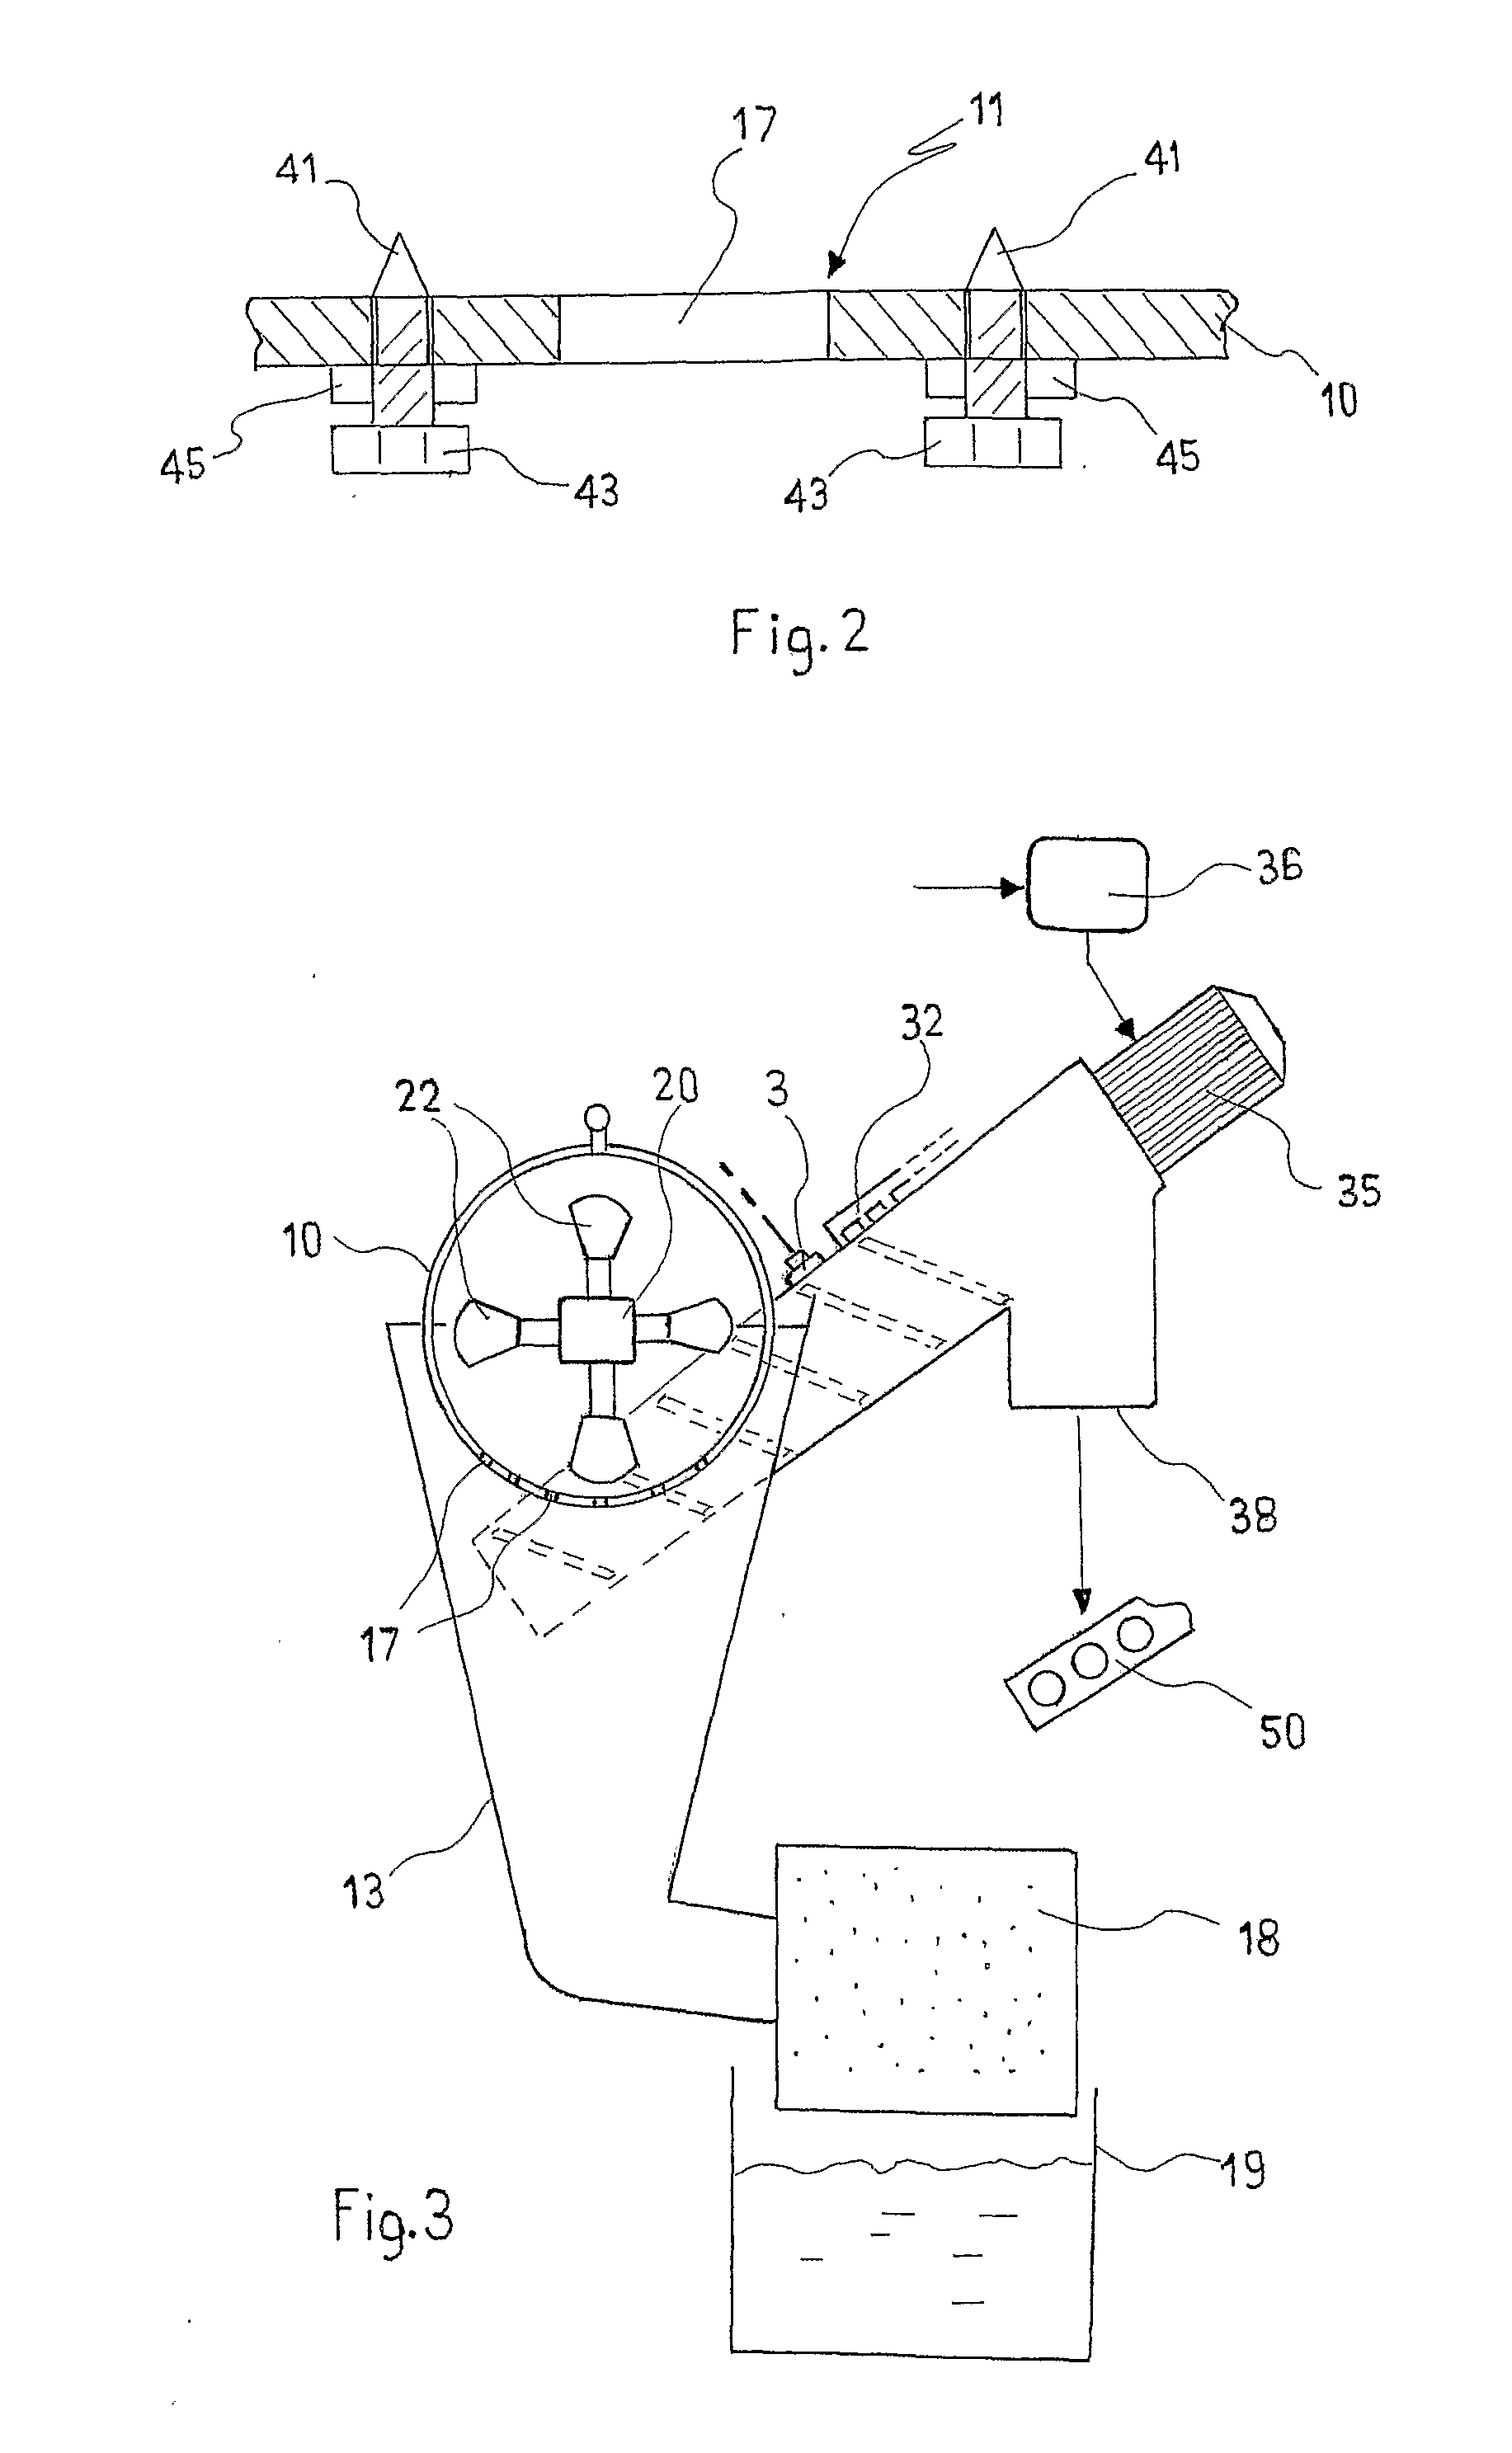 Machine and method for continuously washing containers made of plastic material, and removal of contaminants and labels from their surface